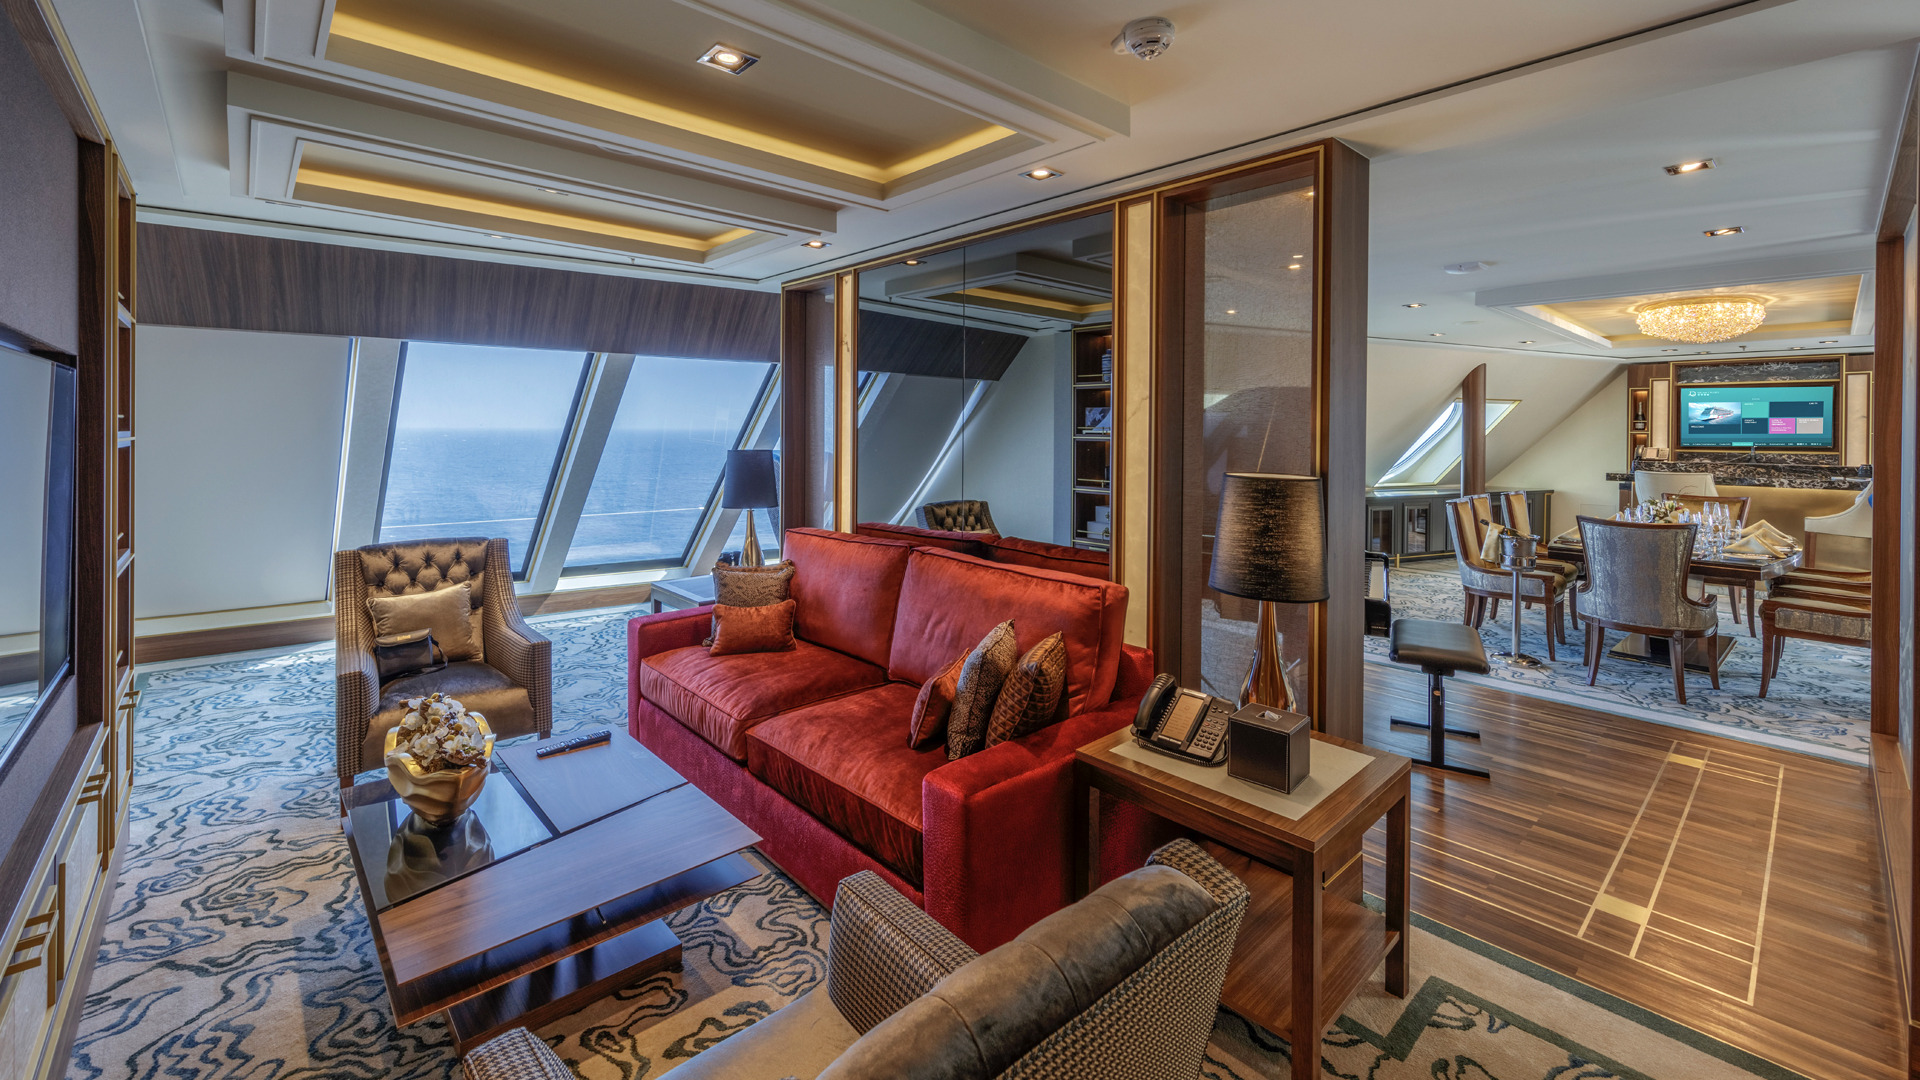 Genting Dream’s Palace Villa features luxurious furnishing and amenities